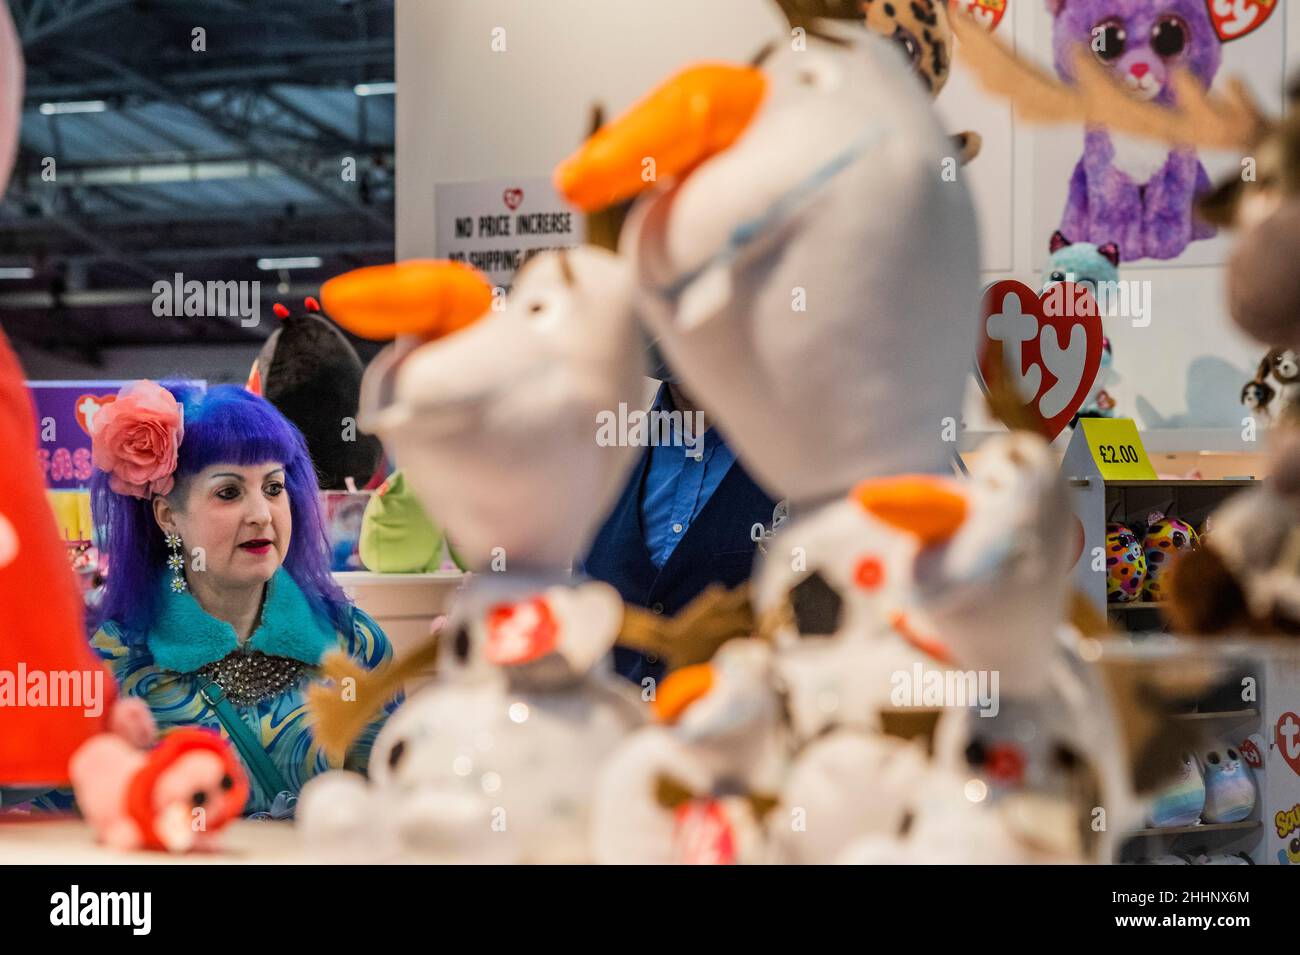 London, UK. 25th Jan, 2022. Olaf from Frozen from TY toys - The 68th Toy Fair at Olympia in London. A trade show organised by the British Toy & Hobby Association, BTHA. Credit: Guy Bell/Alamy Live News Stock Photo